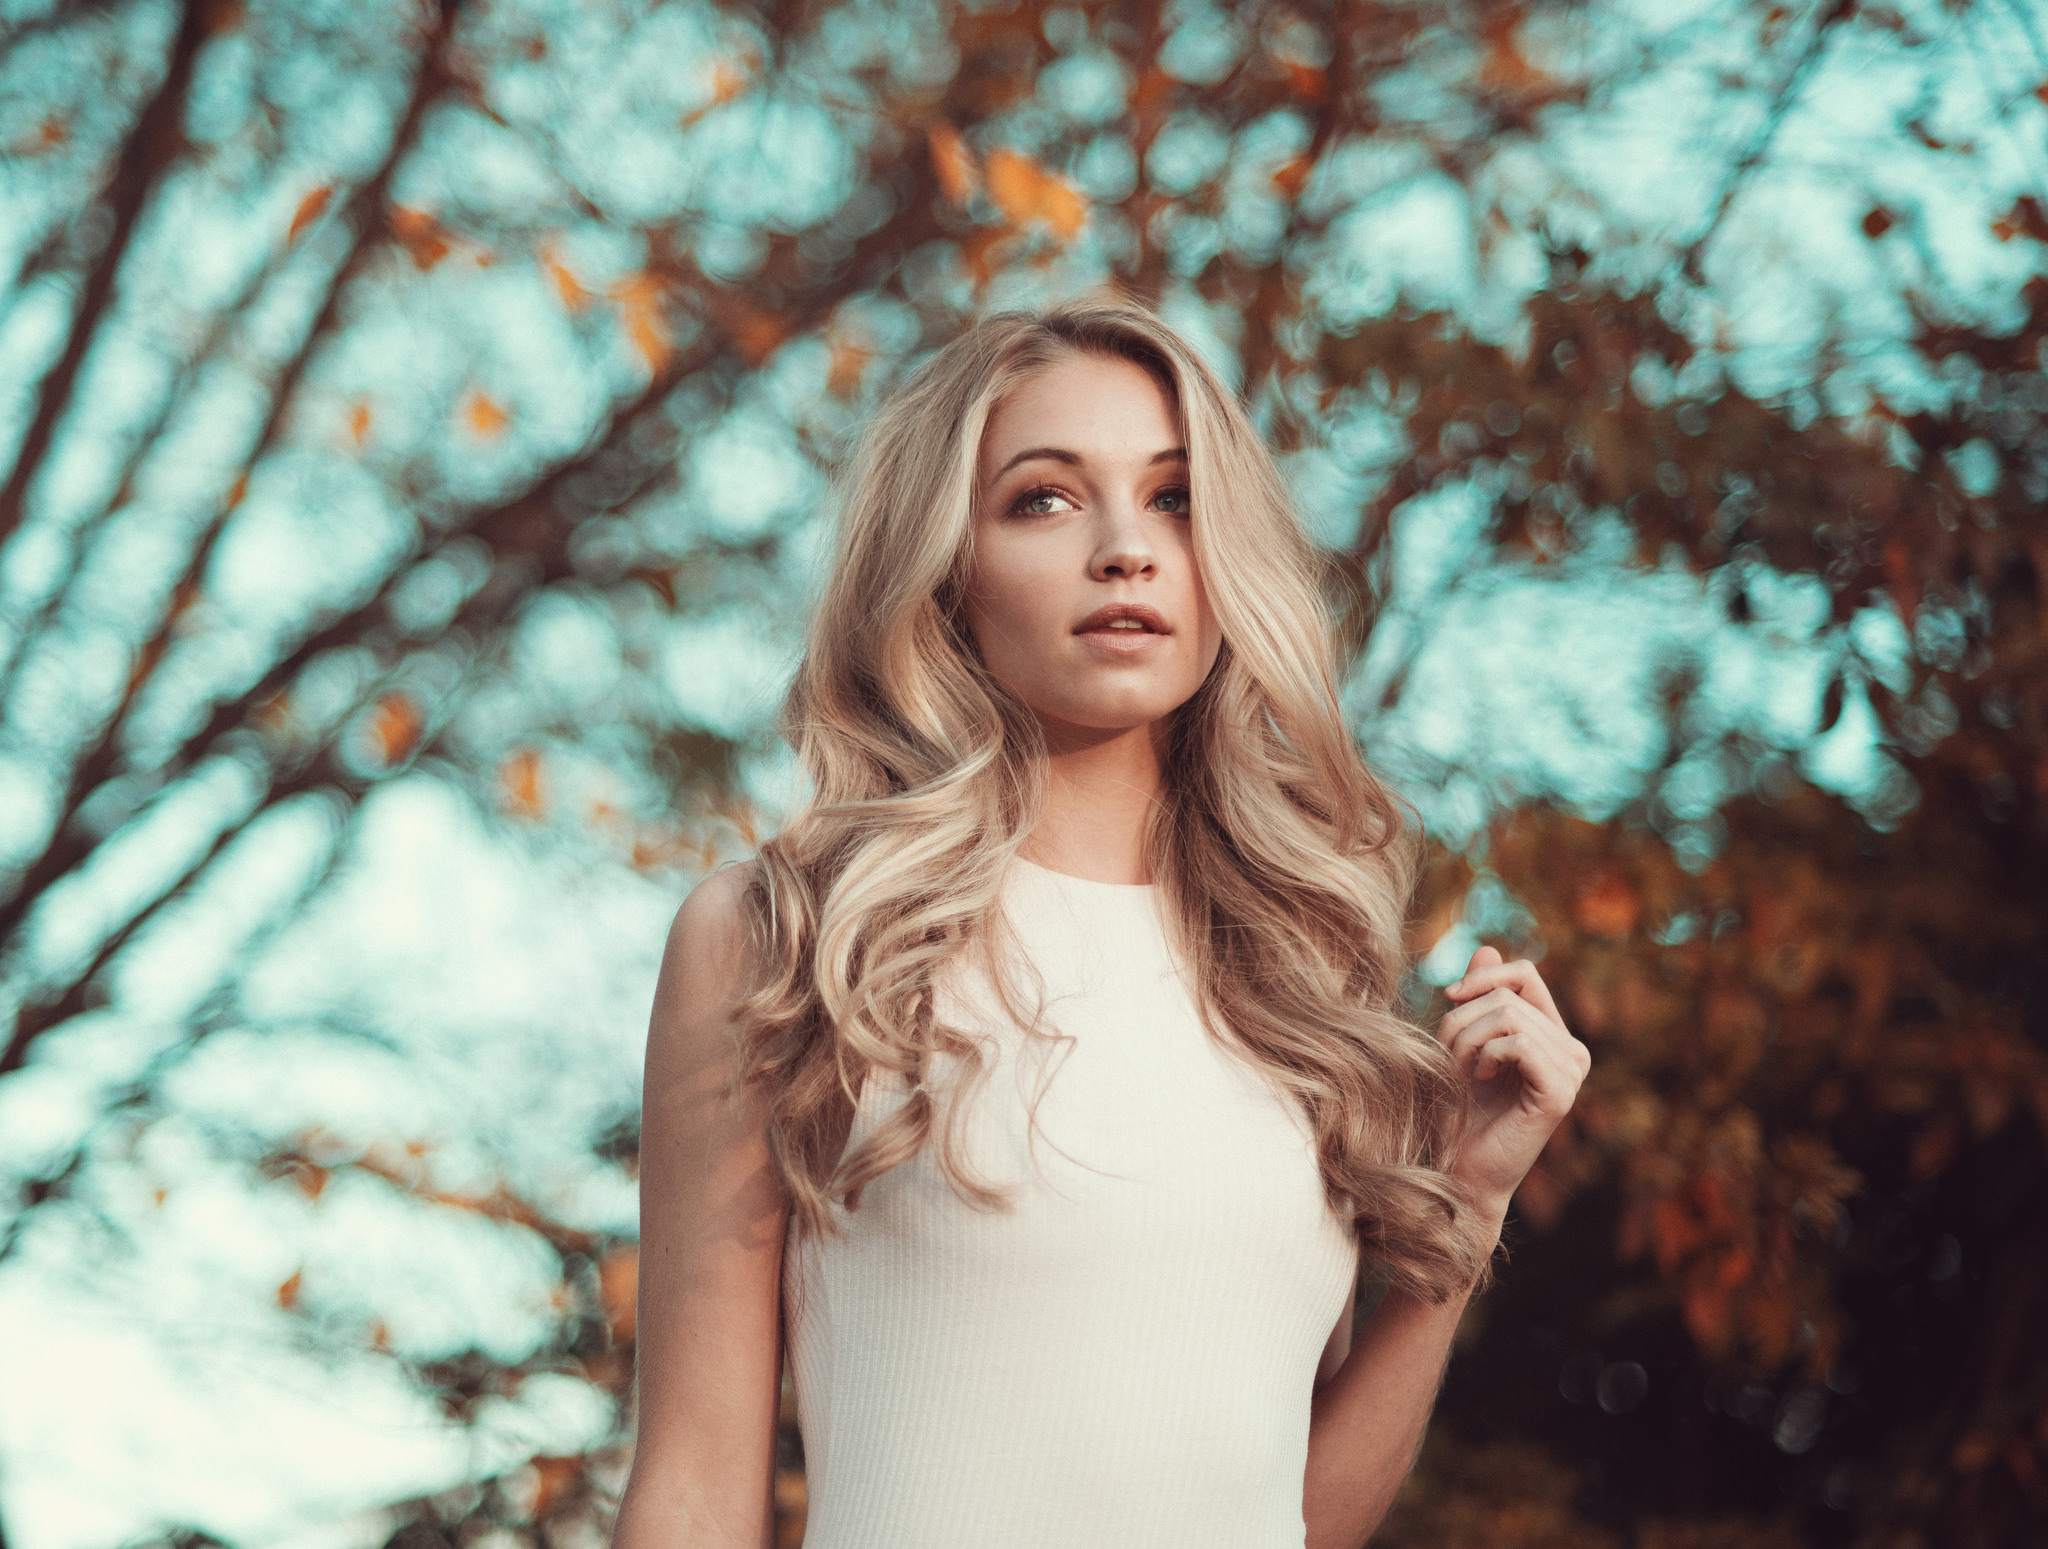 Wallpaper, blonde, portrait, depth of field, looking away, women outdoors, wavy hair, curly hair, white clothing 2048x1549